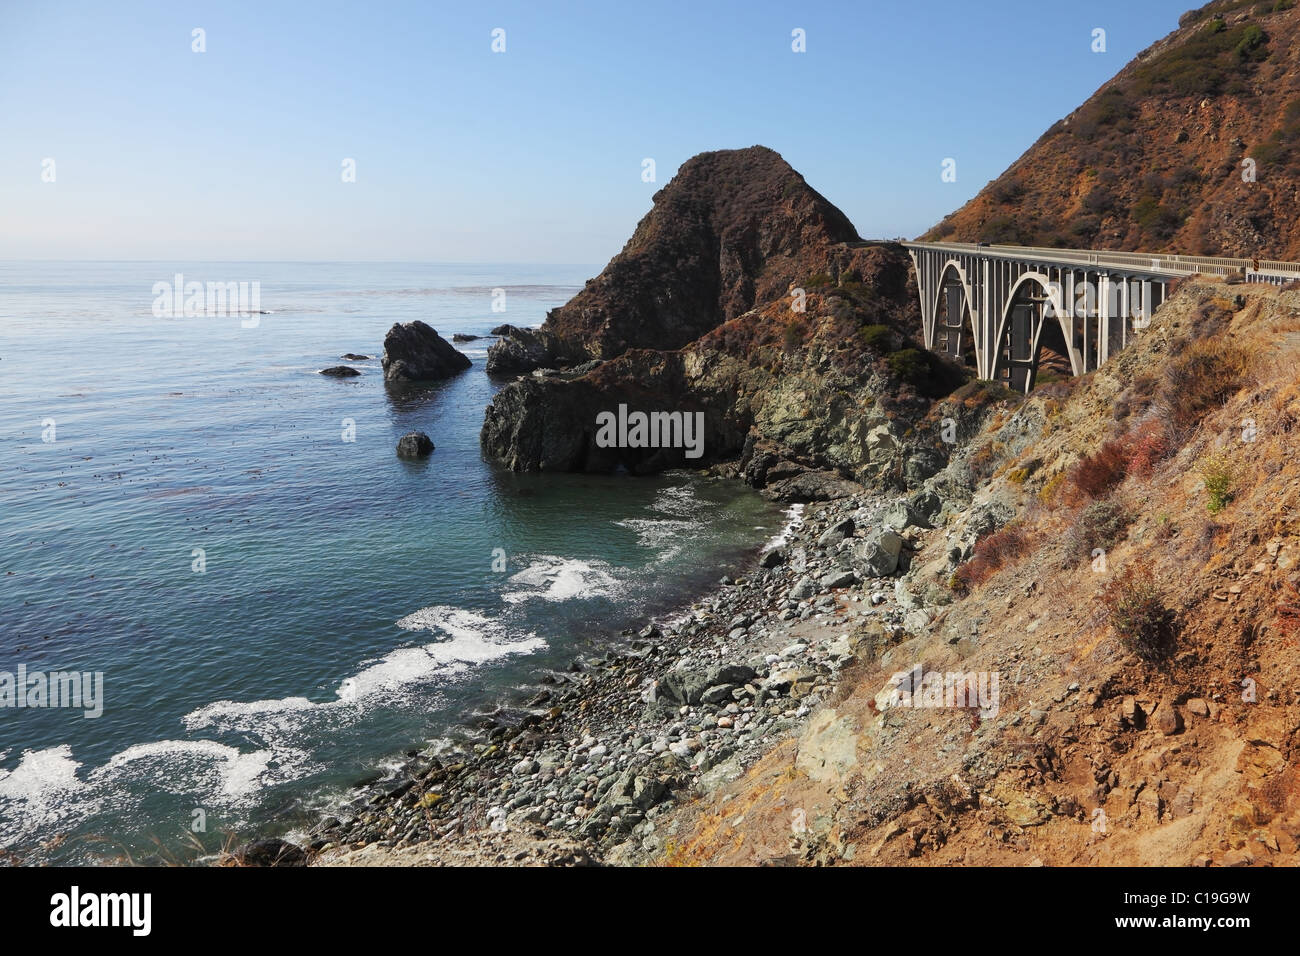 Majestic viaduct on the highway on the picturesque shore of the Pacific Ocean Stock Photo